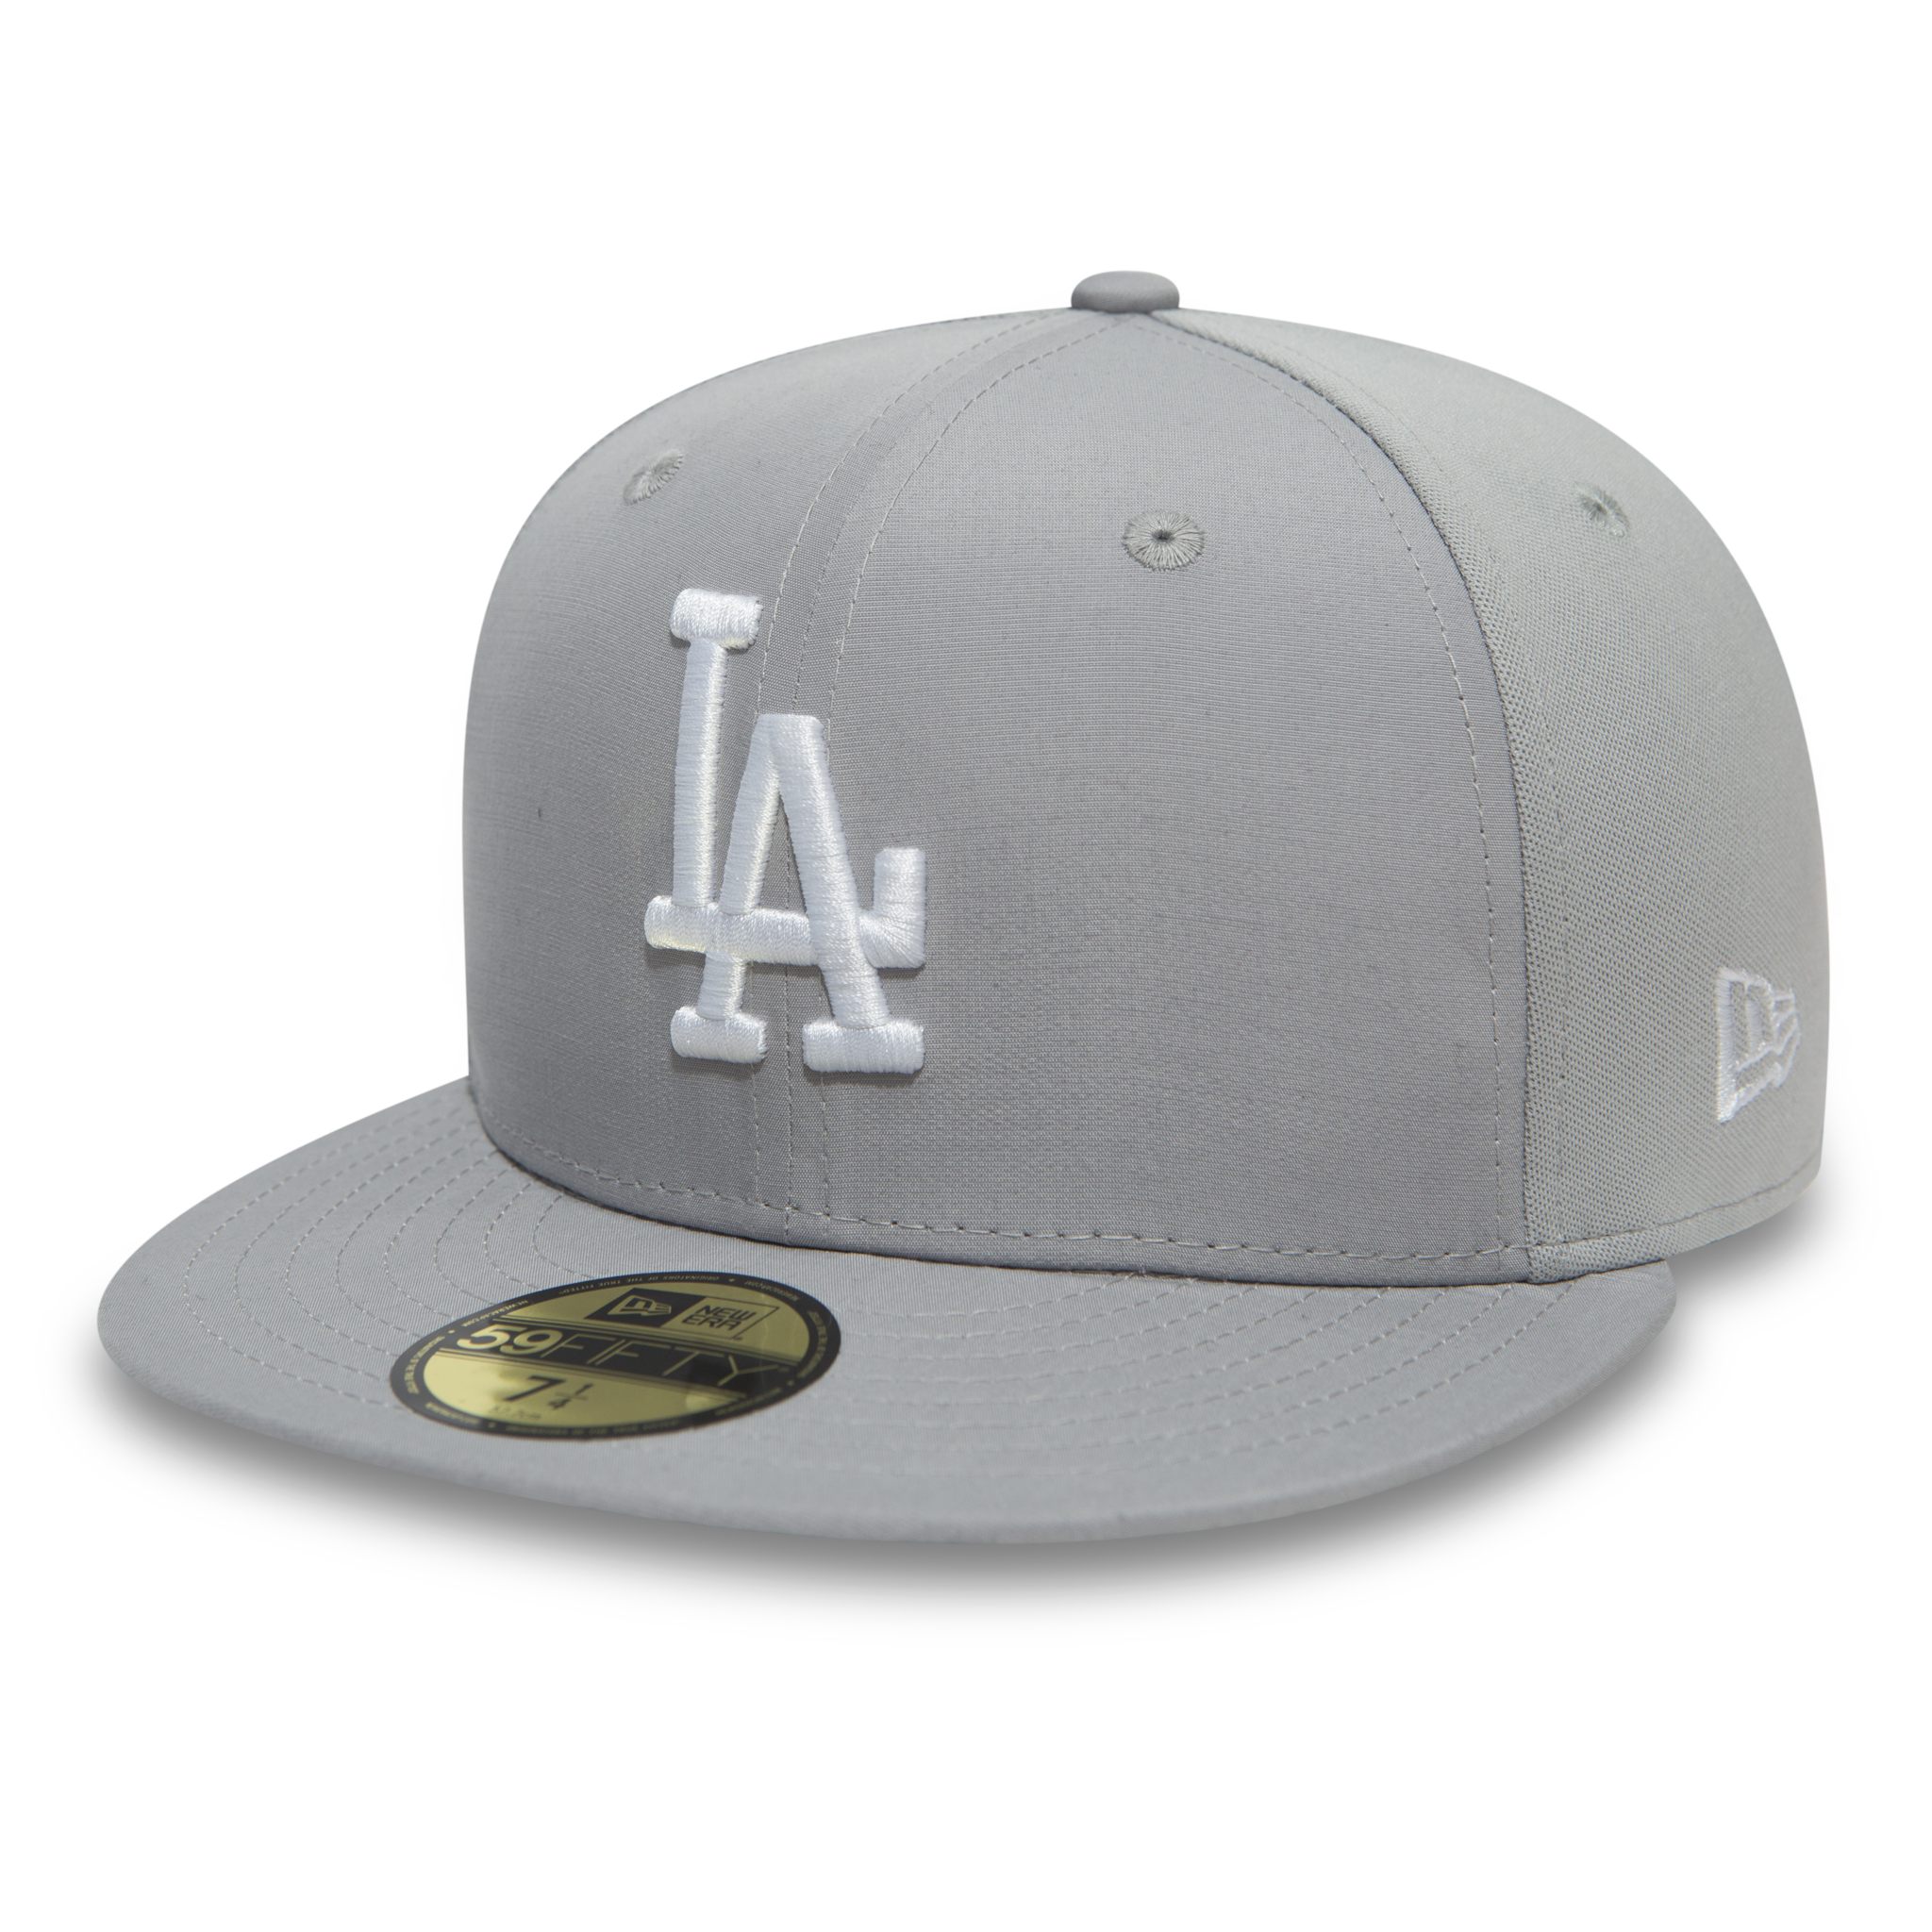 Los Angeles Dodgers 59FIFTY-Kappe in Grafit